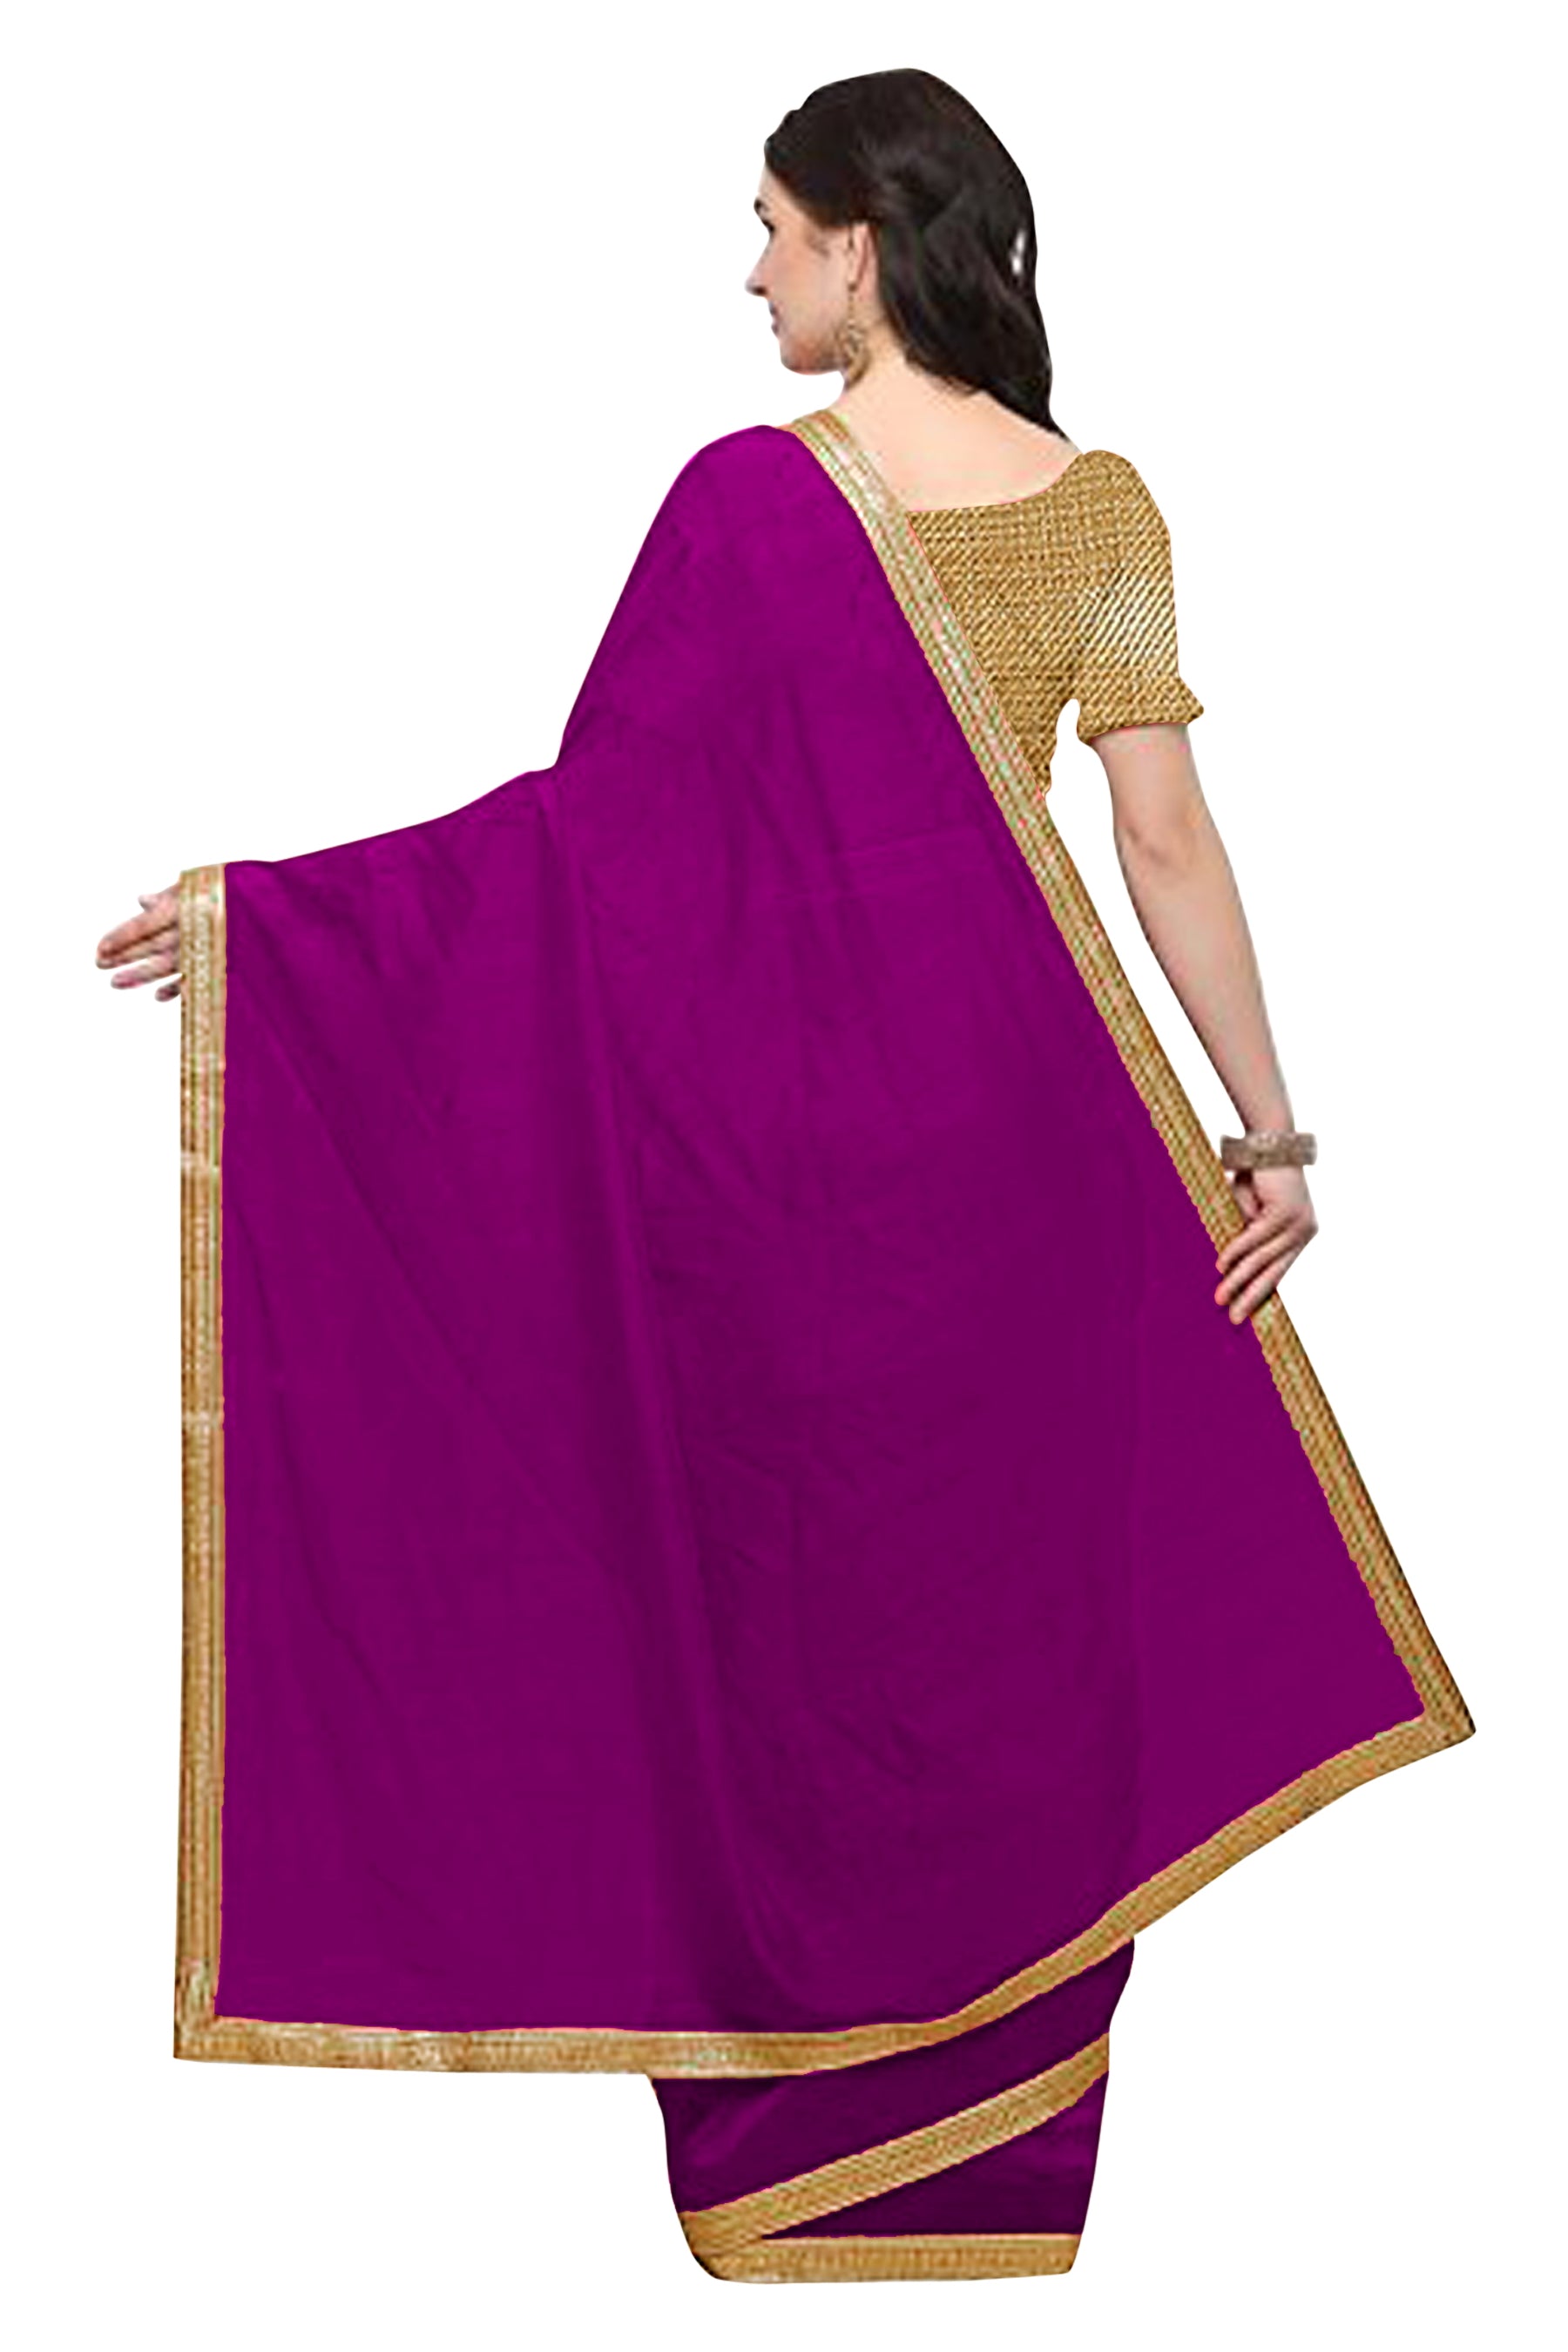 Women's self Woven Solid Occasion Wear Georgette Heavy Border Sari With Blouse Piece (Purple) - NIMIDHYA